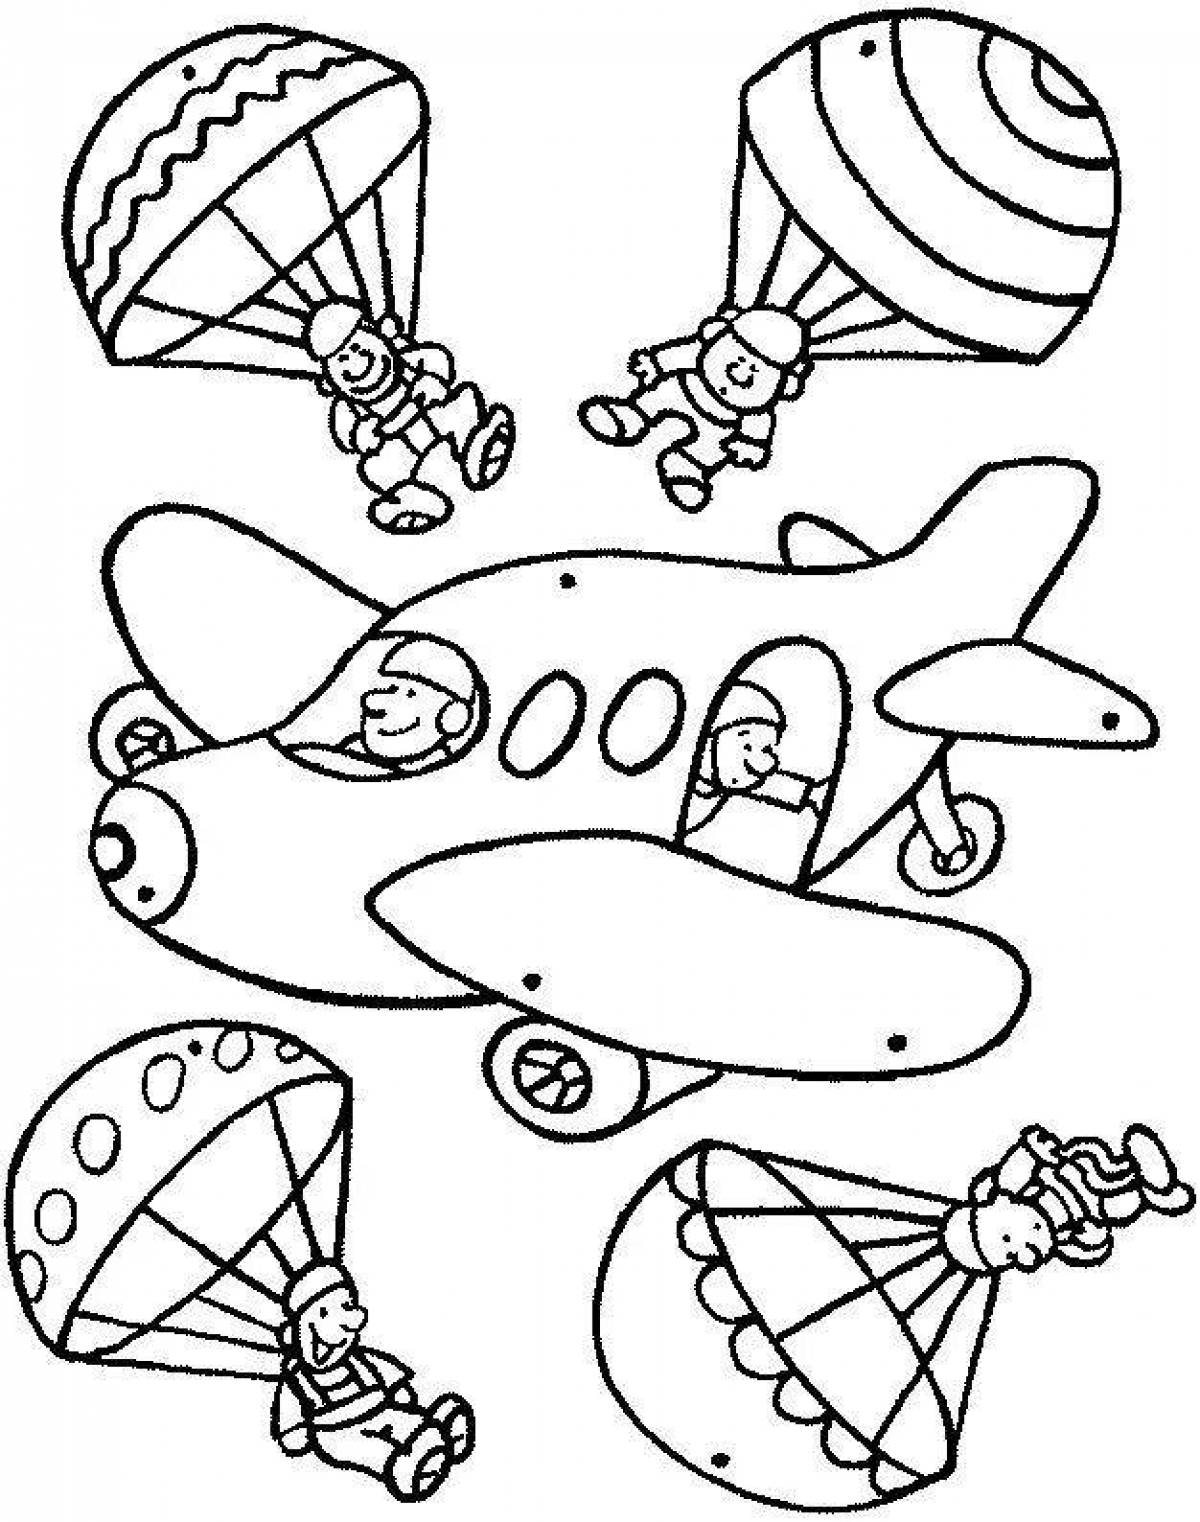 Coloring book for children 4-5 years old